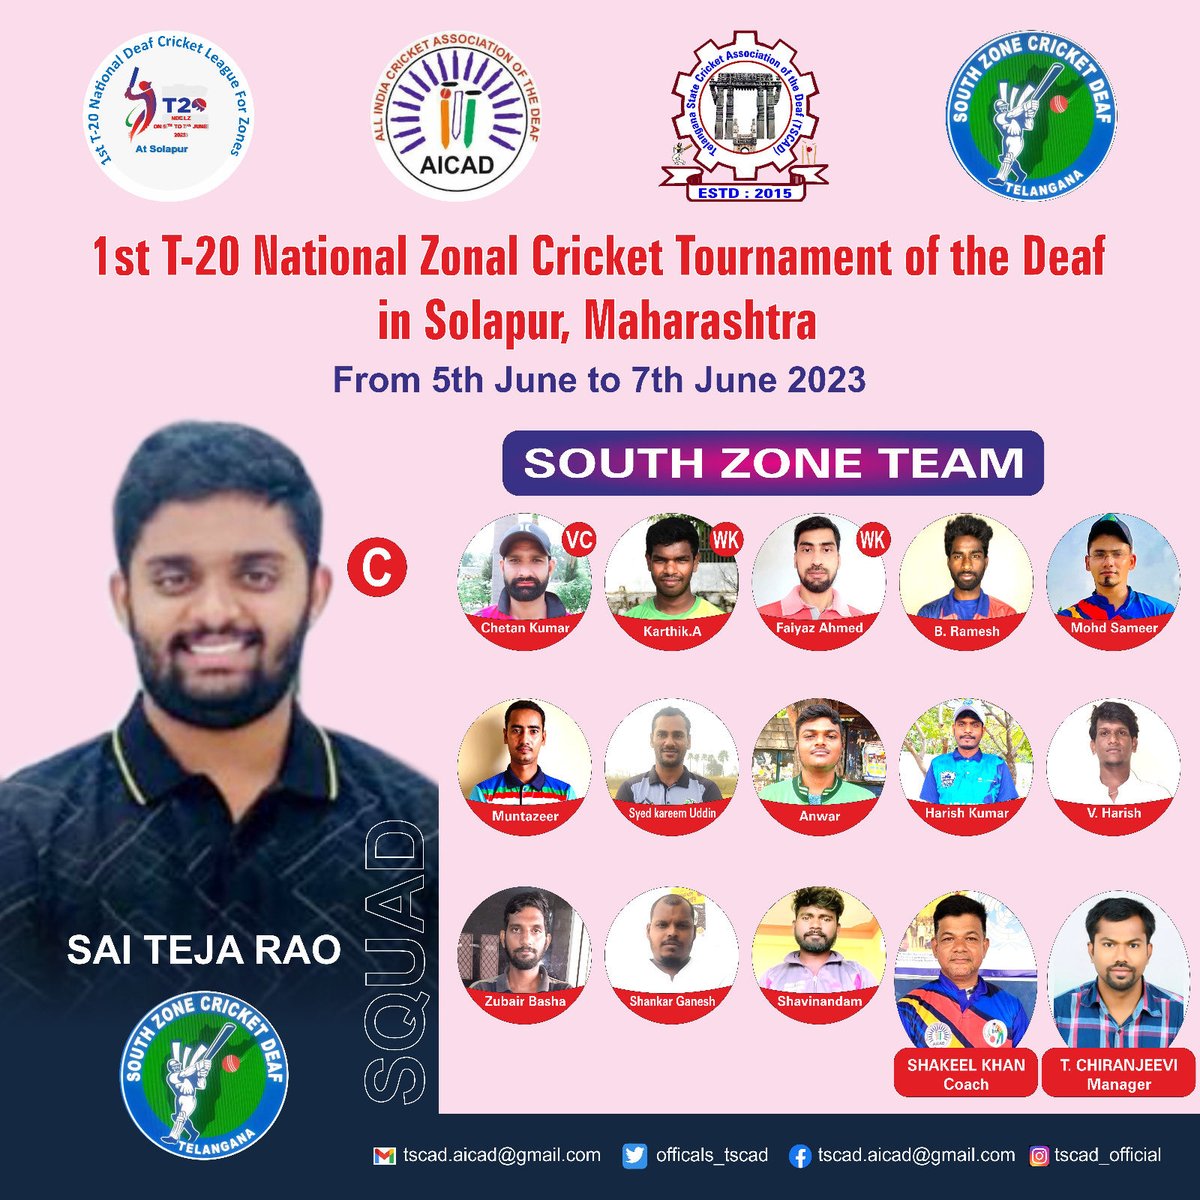 The South Zone squad for T20 National Zonal Deaf Cricket Tournament-2023 at Solarpur (MH) has a 16-member team which includes: Host: Maharashtra Deaf Cricket Federation Affiliated AICAD_Official’s on 05-07 June 2023 at Solarpur( MH) @AICAD_Officials @Bcci @1984.dcad @Tscad